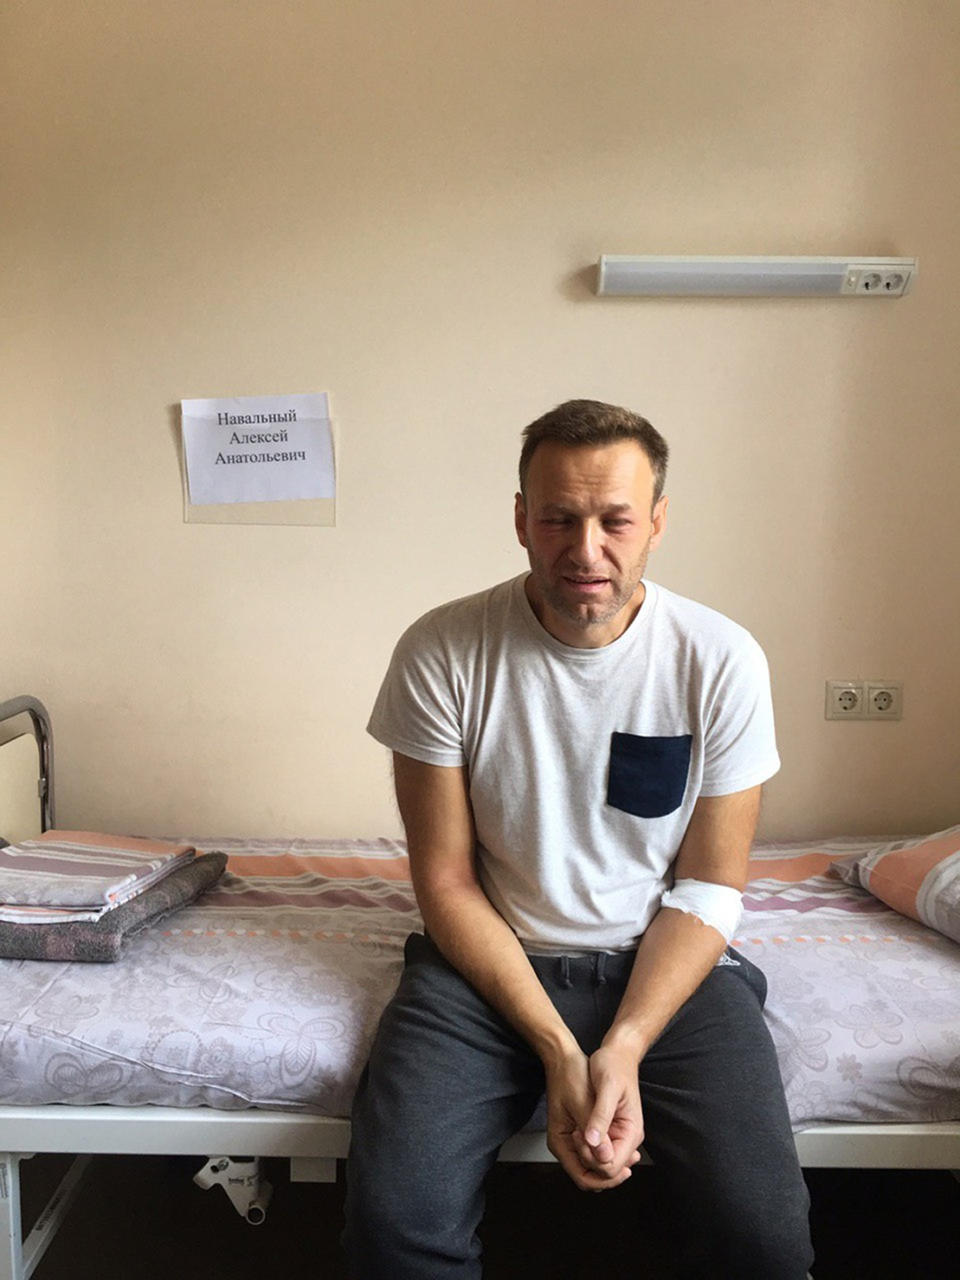 This Monday, July 29, 2019 handout photo released by navalny.com shows Alexei Navalny, Russia's most prominent opposition figure, sitting on a bed in a hospital, in Moscow, Russia. Russian opposition leader Alexei Navalny was discharged from a hospital Monday even though his physician raised suspicions of a possible poisoning after he suffered facial swelling and a rash while in jail. (navalny.com via AP)